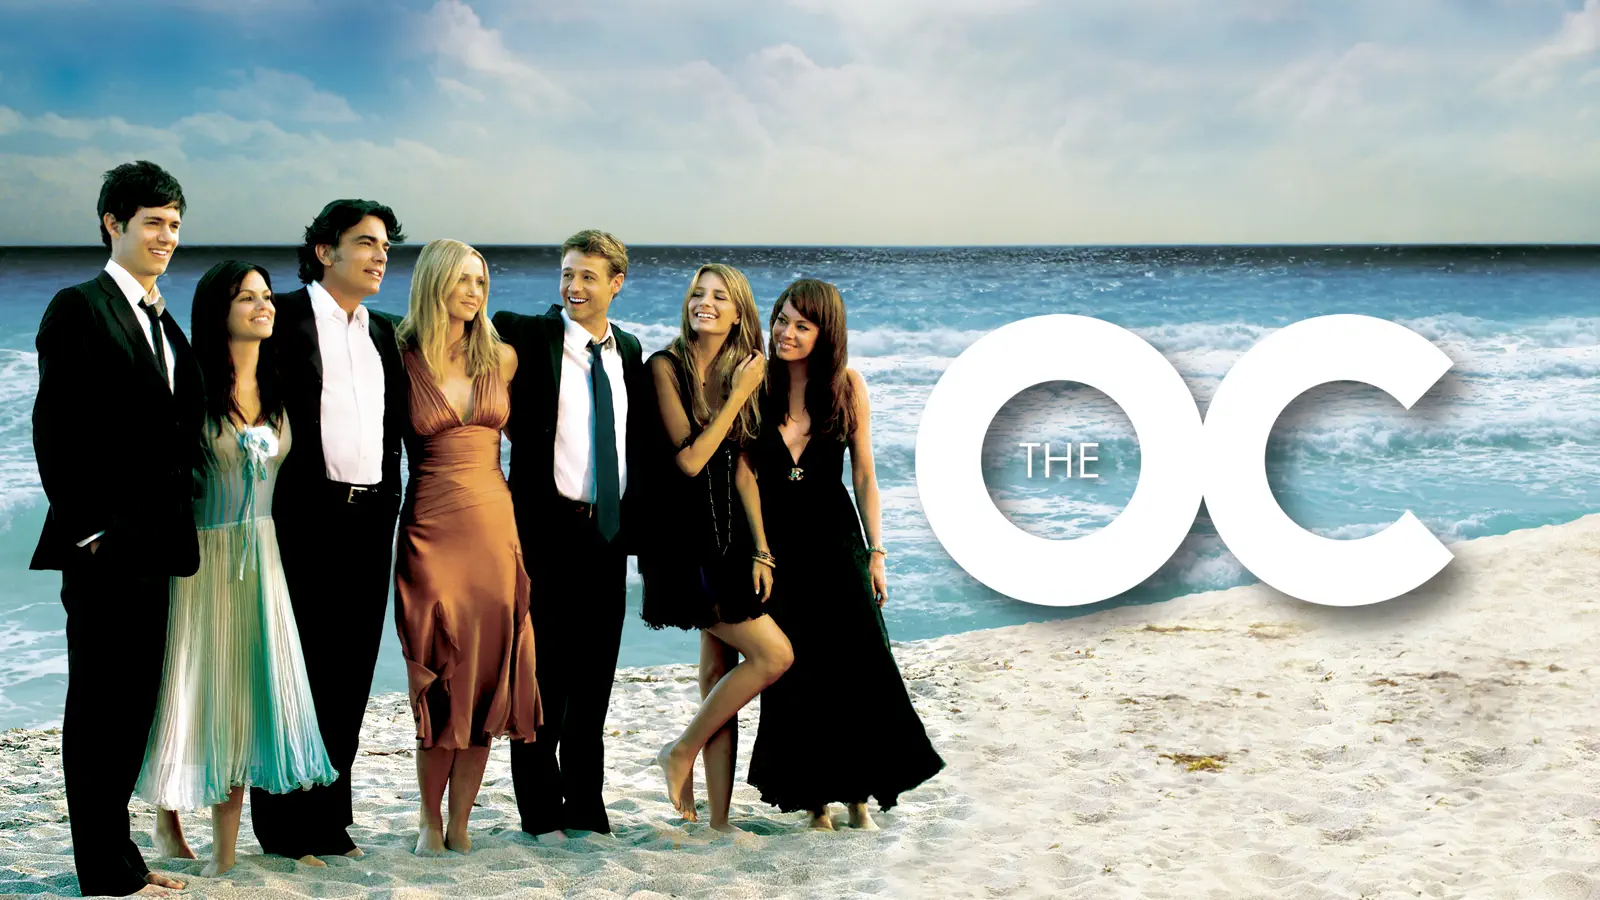 The O.C.; a TV show of the 2000s